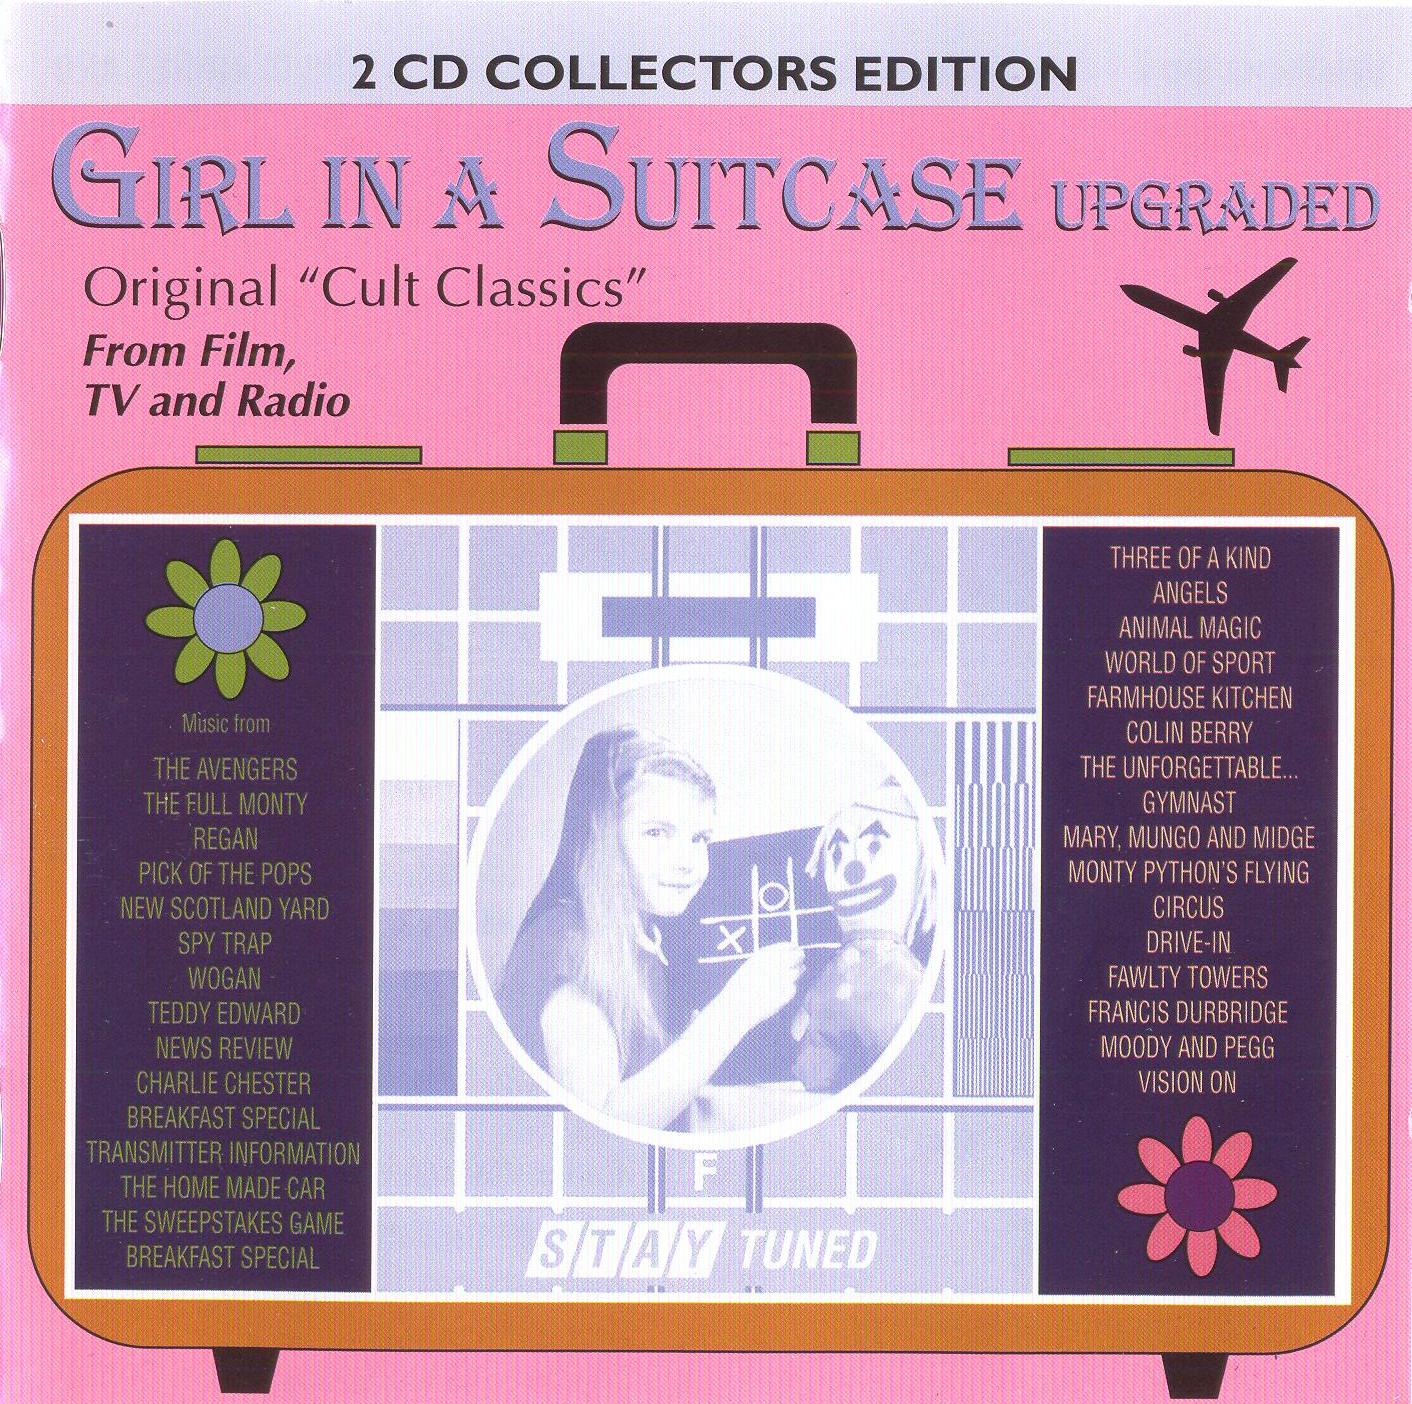 Test collection. Сборник easy Listening CD диск. Gina Orchestra - girl. Сборник easy Listening CD диск девушка на обложке. Cult TV Classic.